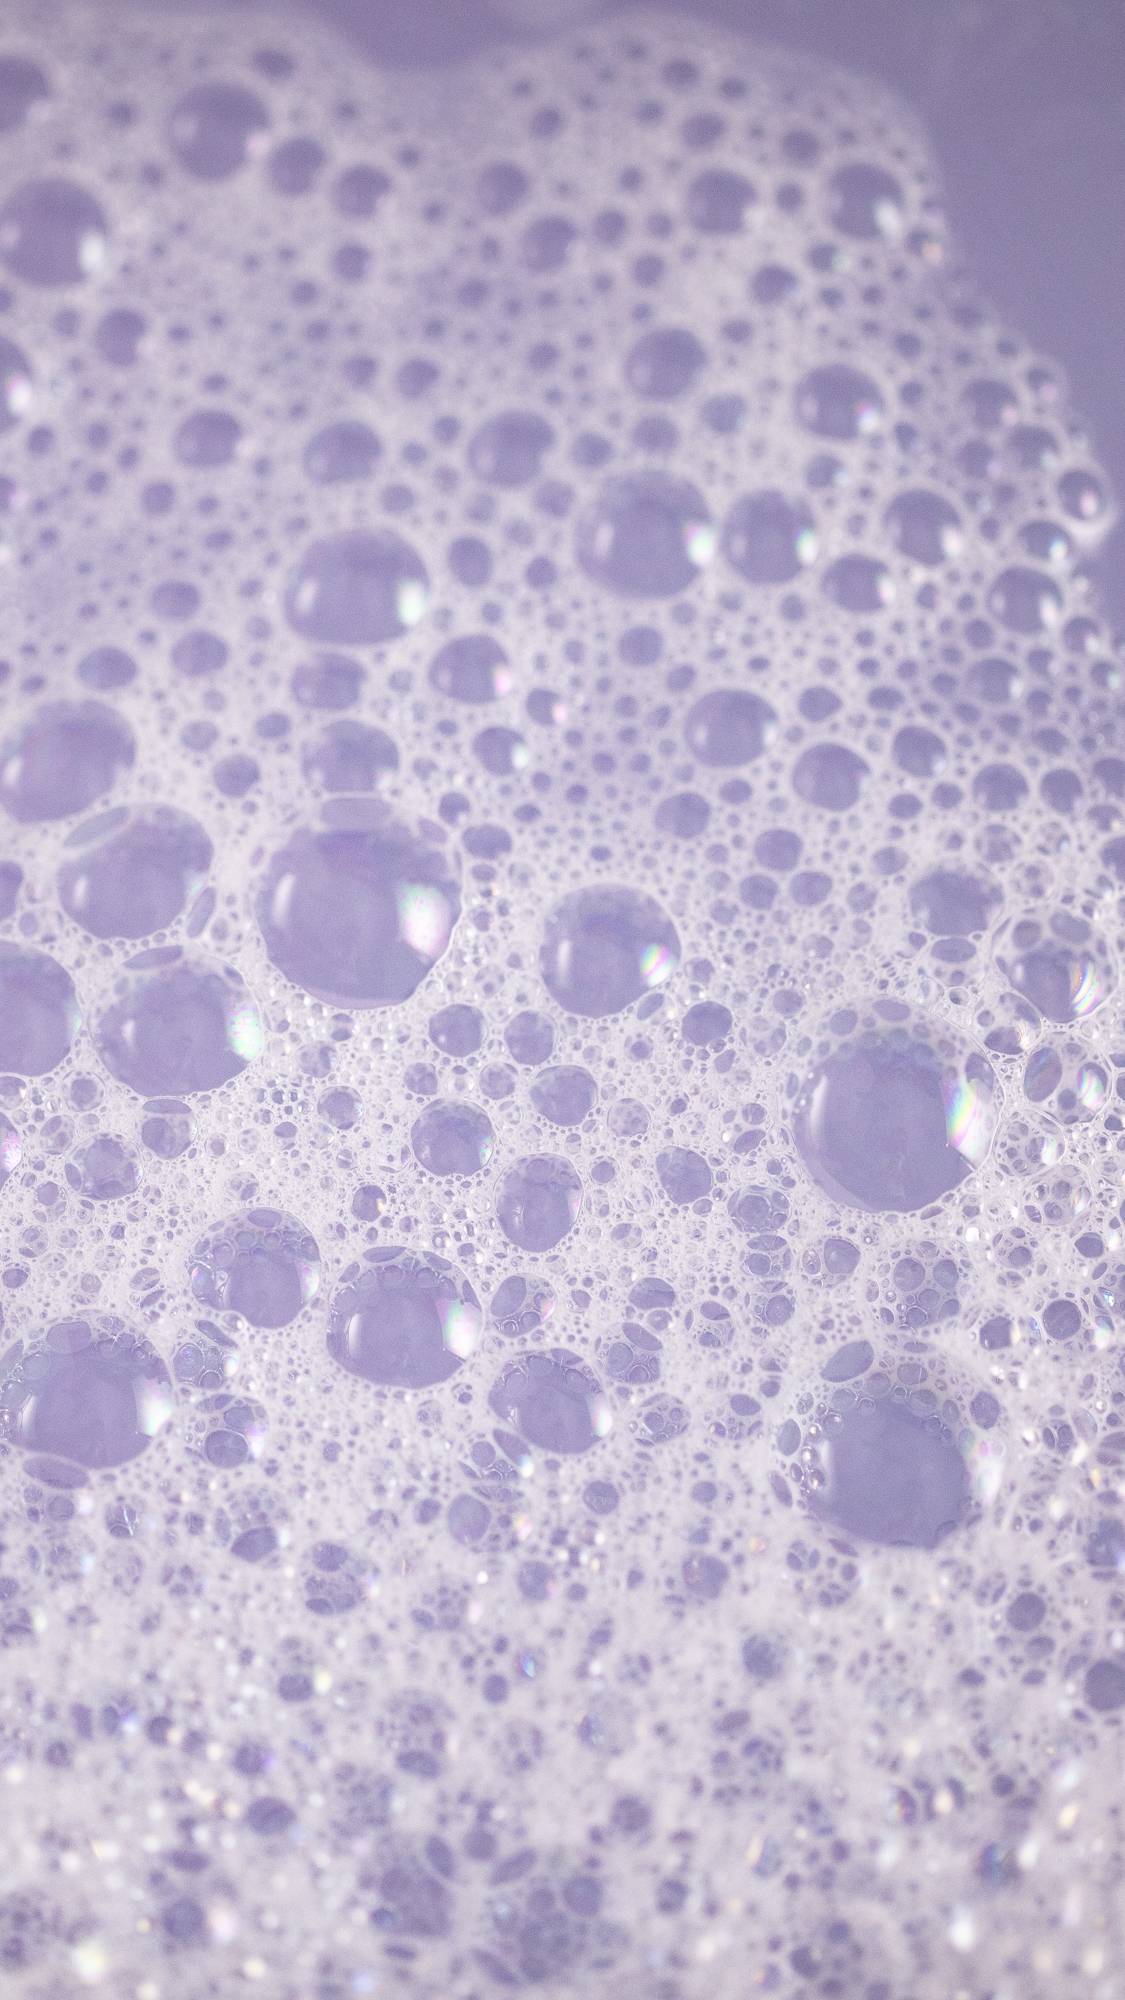 The image shows a close-up of the bath water as it has been coloured a delicate lilac with a carpet of velvety bubbles on top.